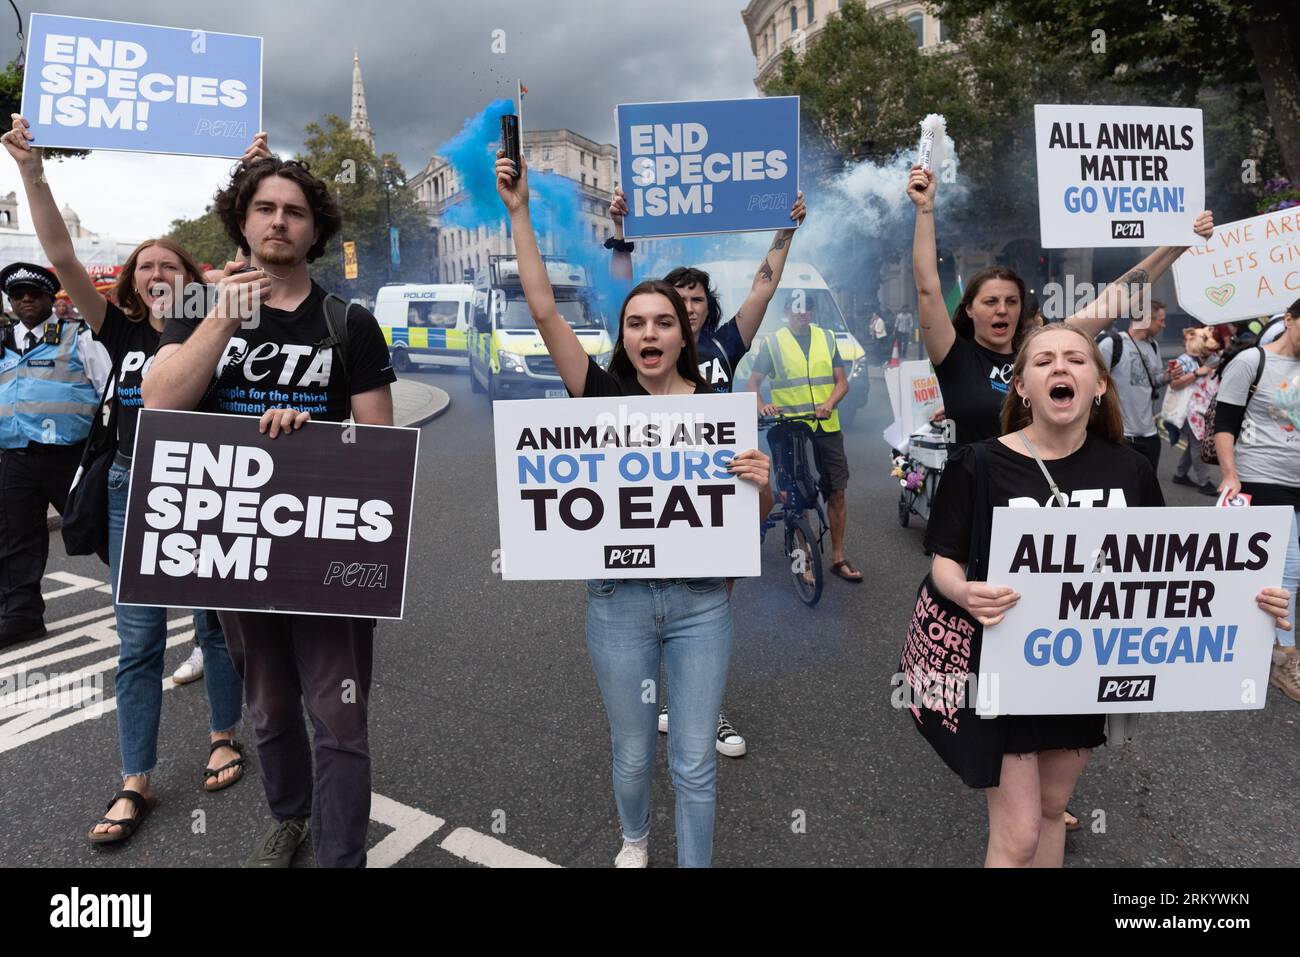 London, UK. 26 August, 2023. Activists from PETA (People for the Ethical Treatment of Animals) on the annual National Animal Rights march, from Marble Arch to Parliament Square, promoting animal welfare, opposing animal exploitation and cruelty on ethical and environmental grounds and calling for a plant-based food system. Credit: Ron Fassbender/Alamy Live News Stock Photo